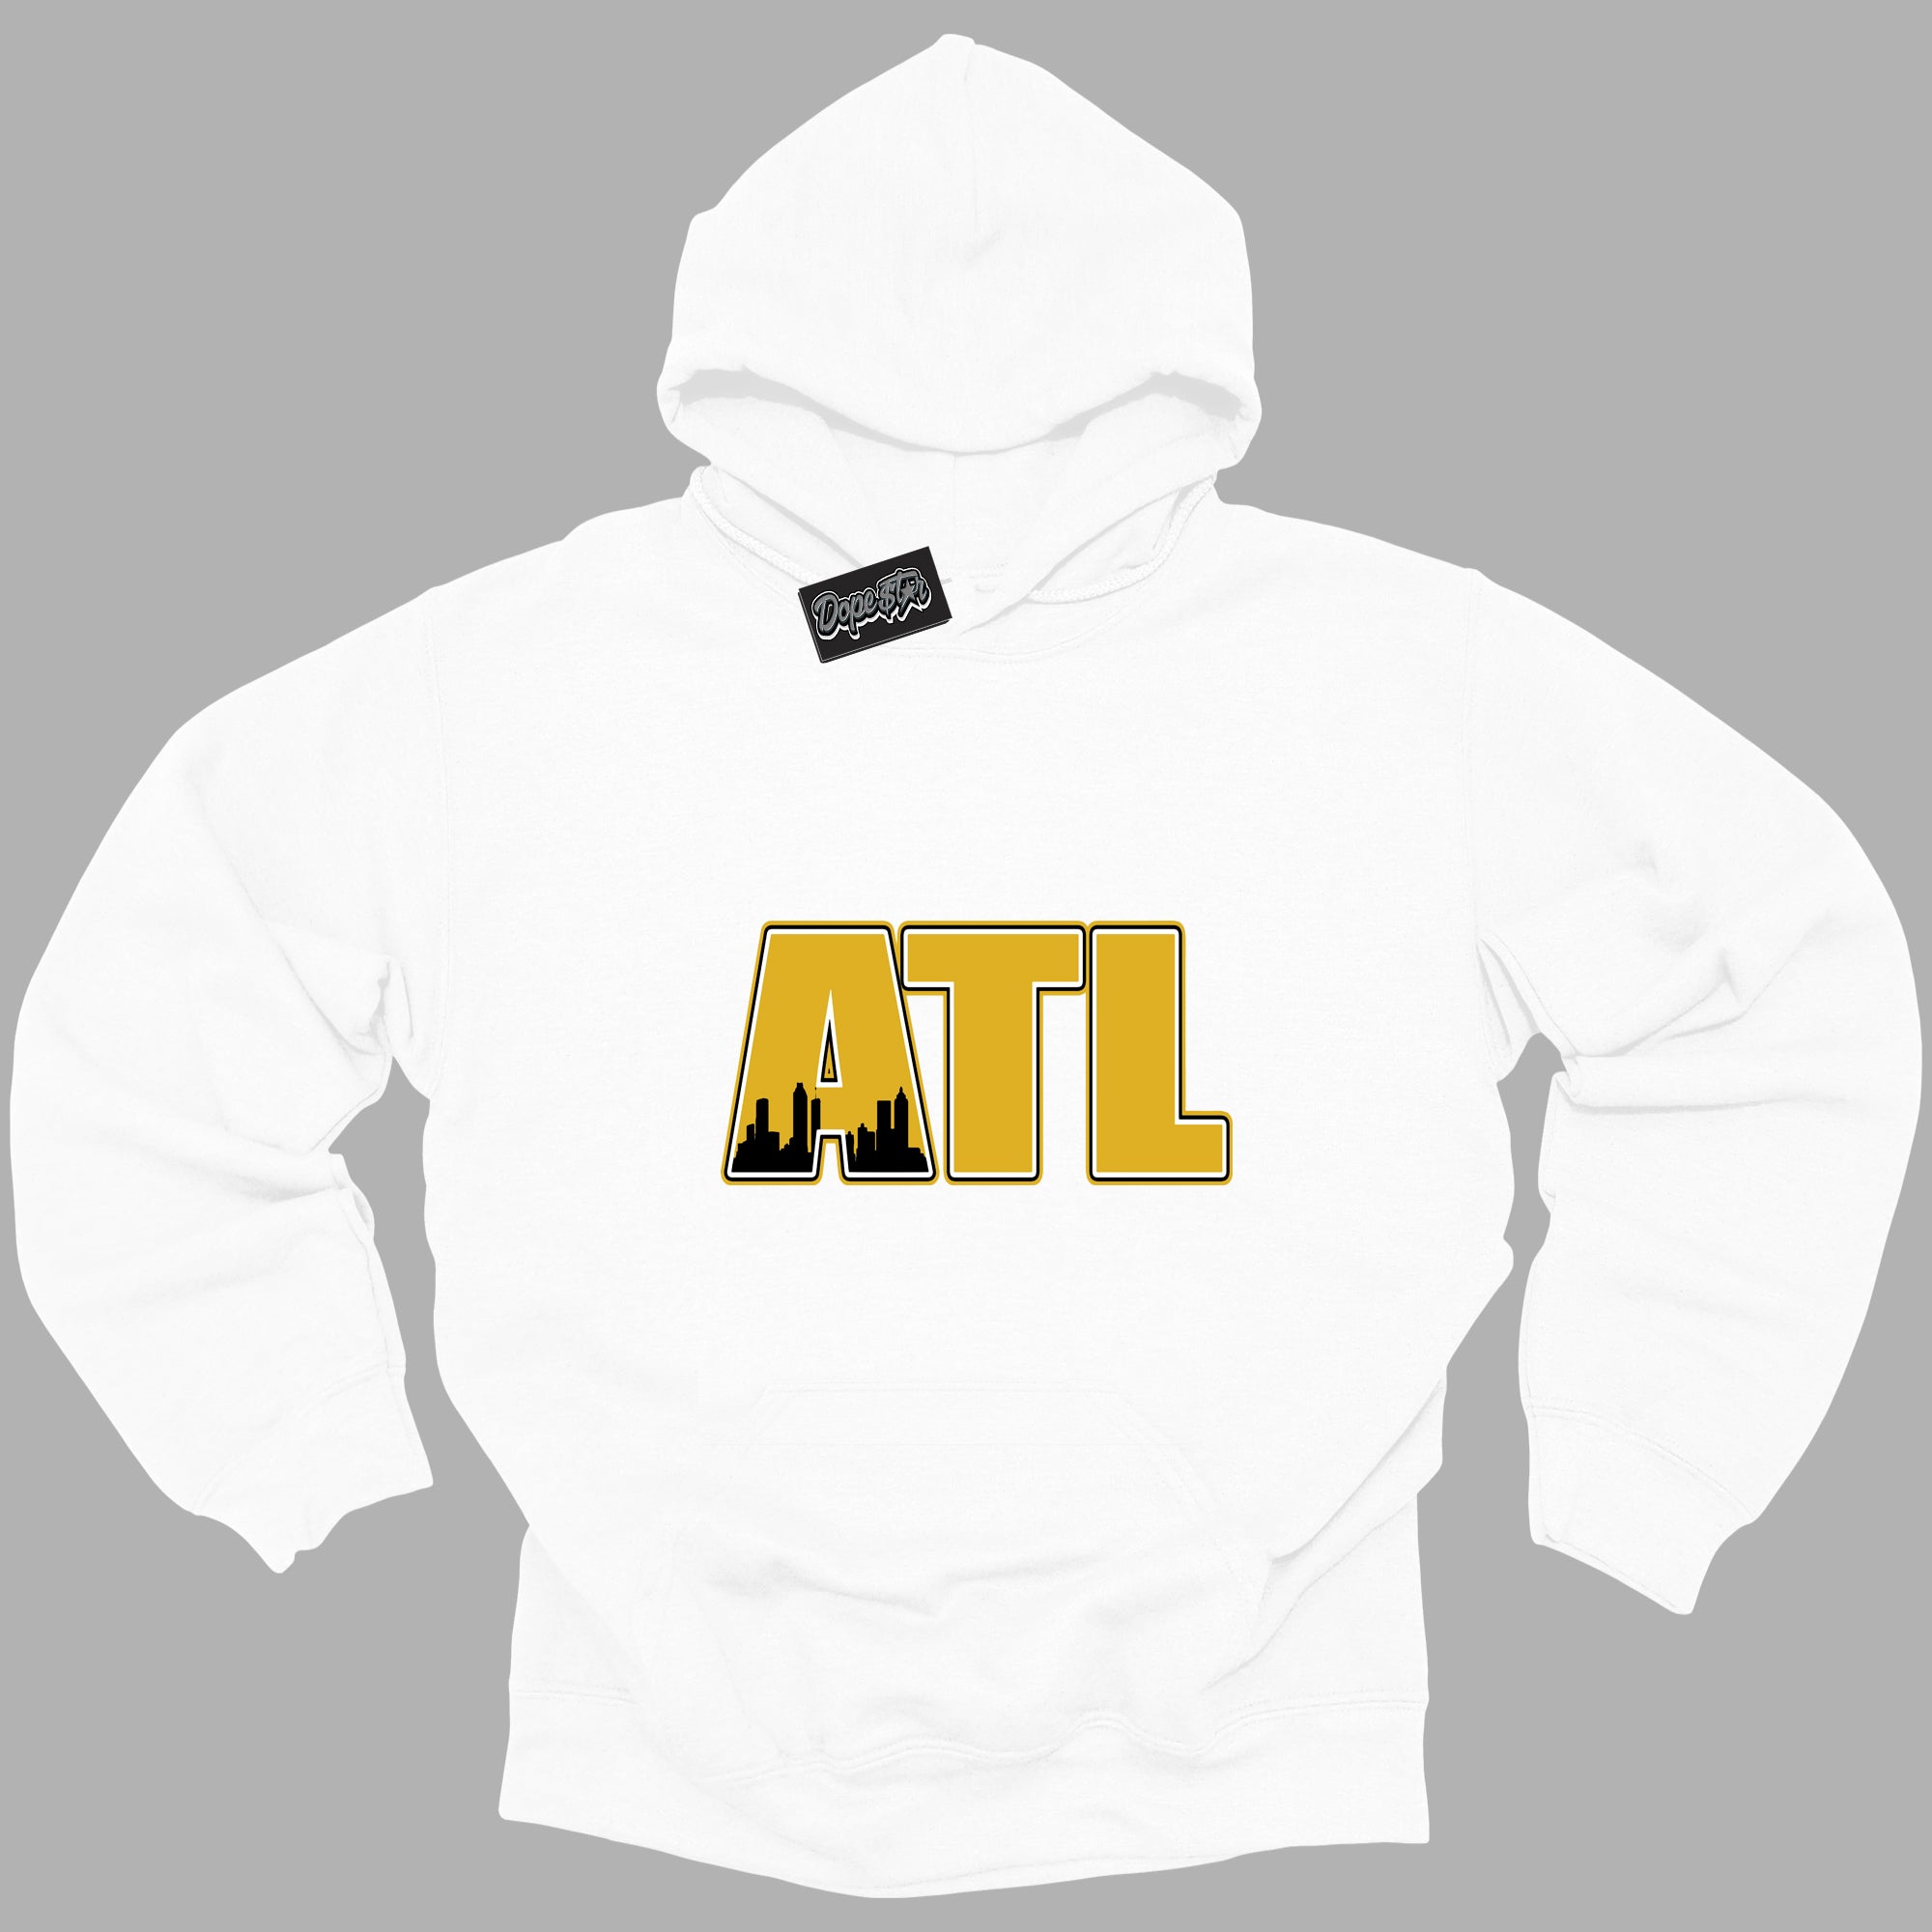 Cool White Hoodie with “ Atlanta ”  design that Perfectly Matches Yellow Ochre 6s Sneakers.